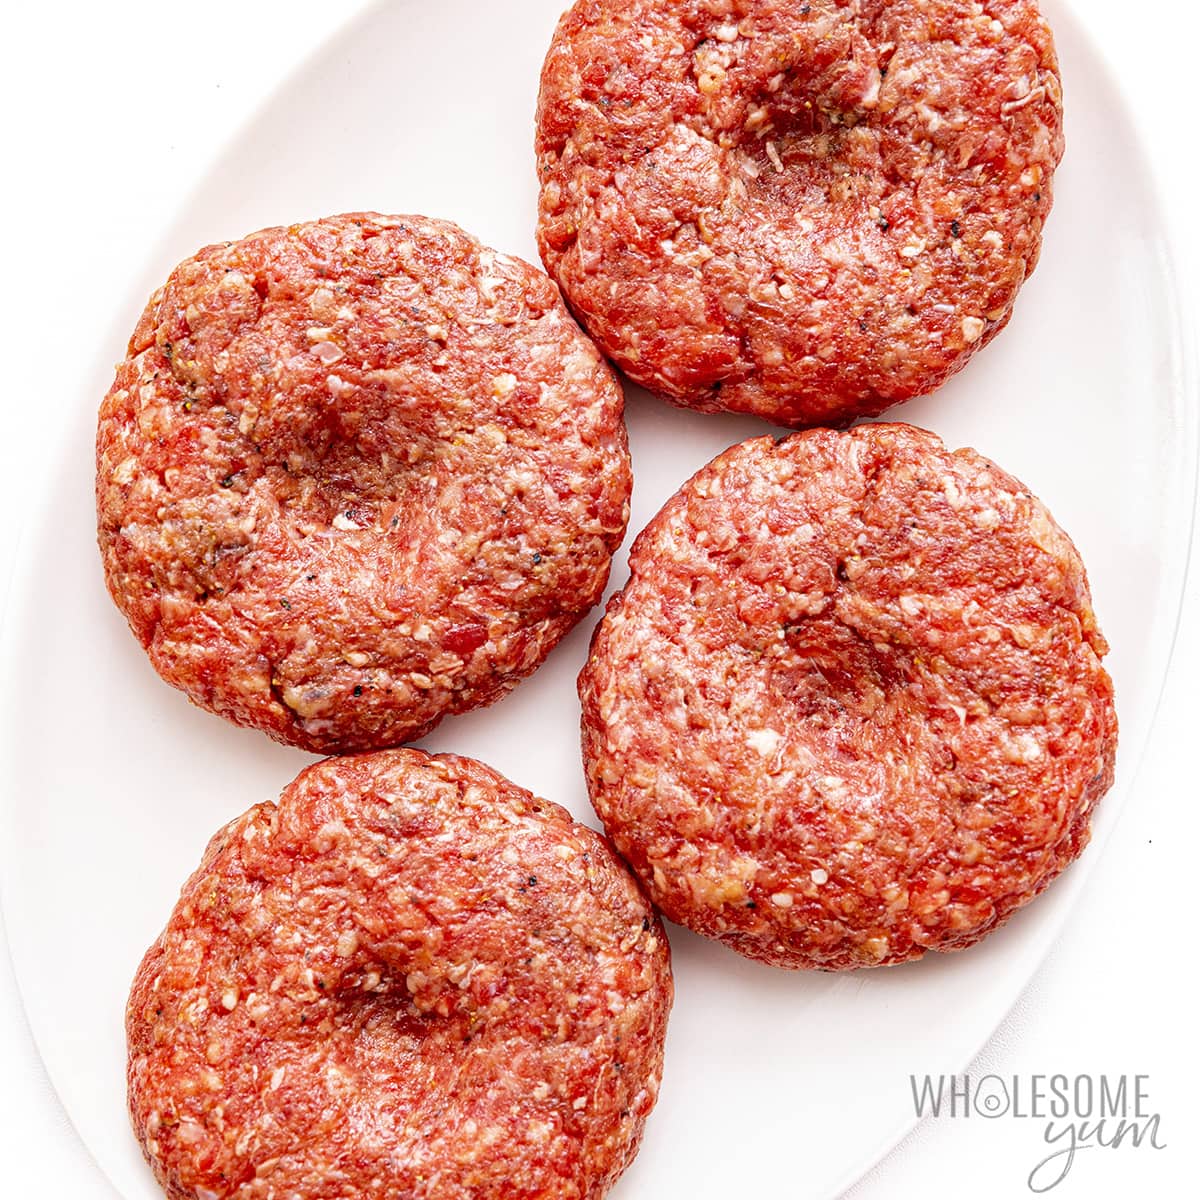 Hamburger shaped into patties with a thumb print in the center.